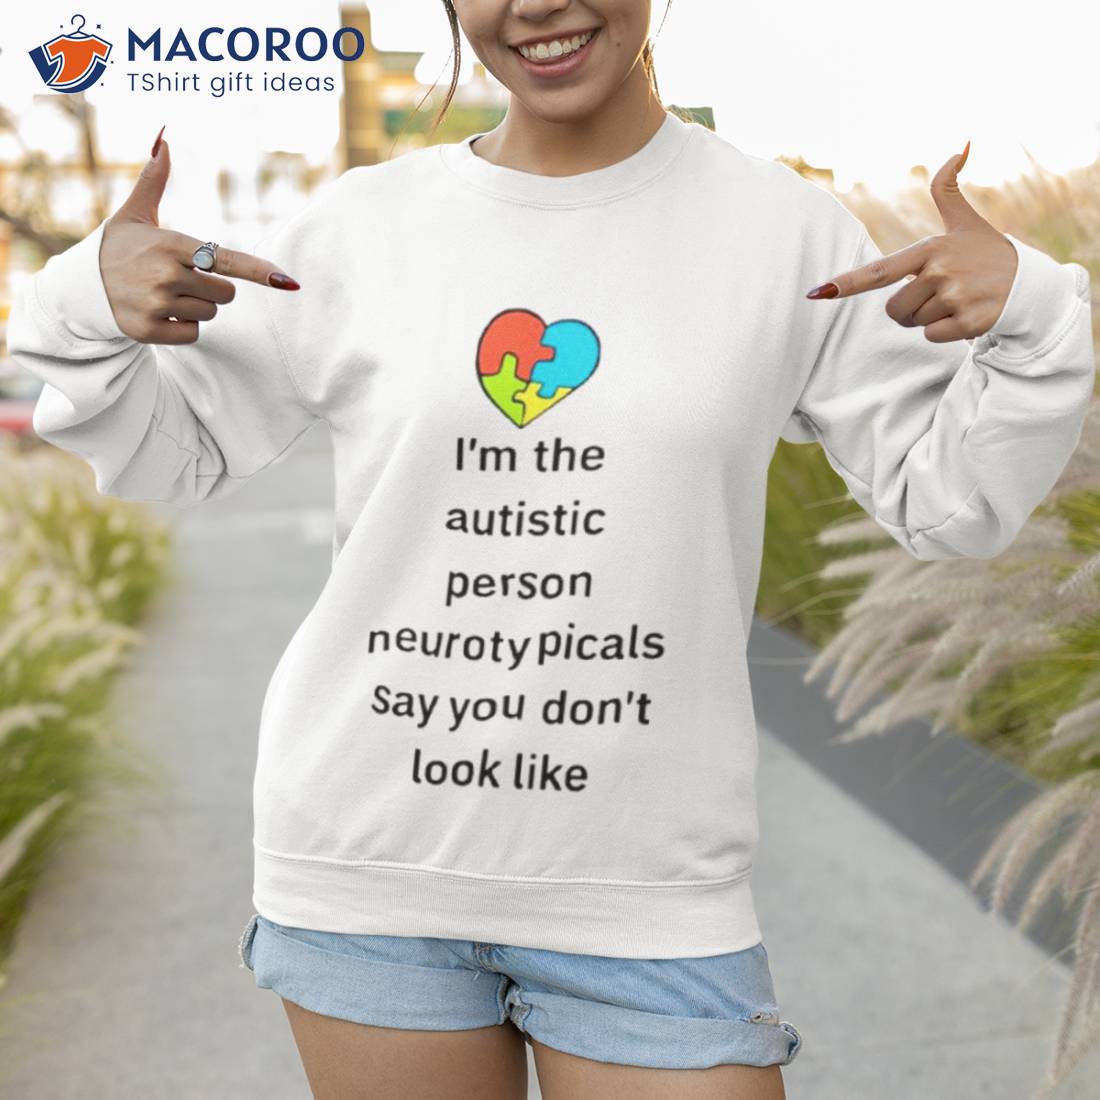 I’m The Autistic Person Neurotypicals Say You Don’t Look Like Shirt